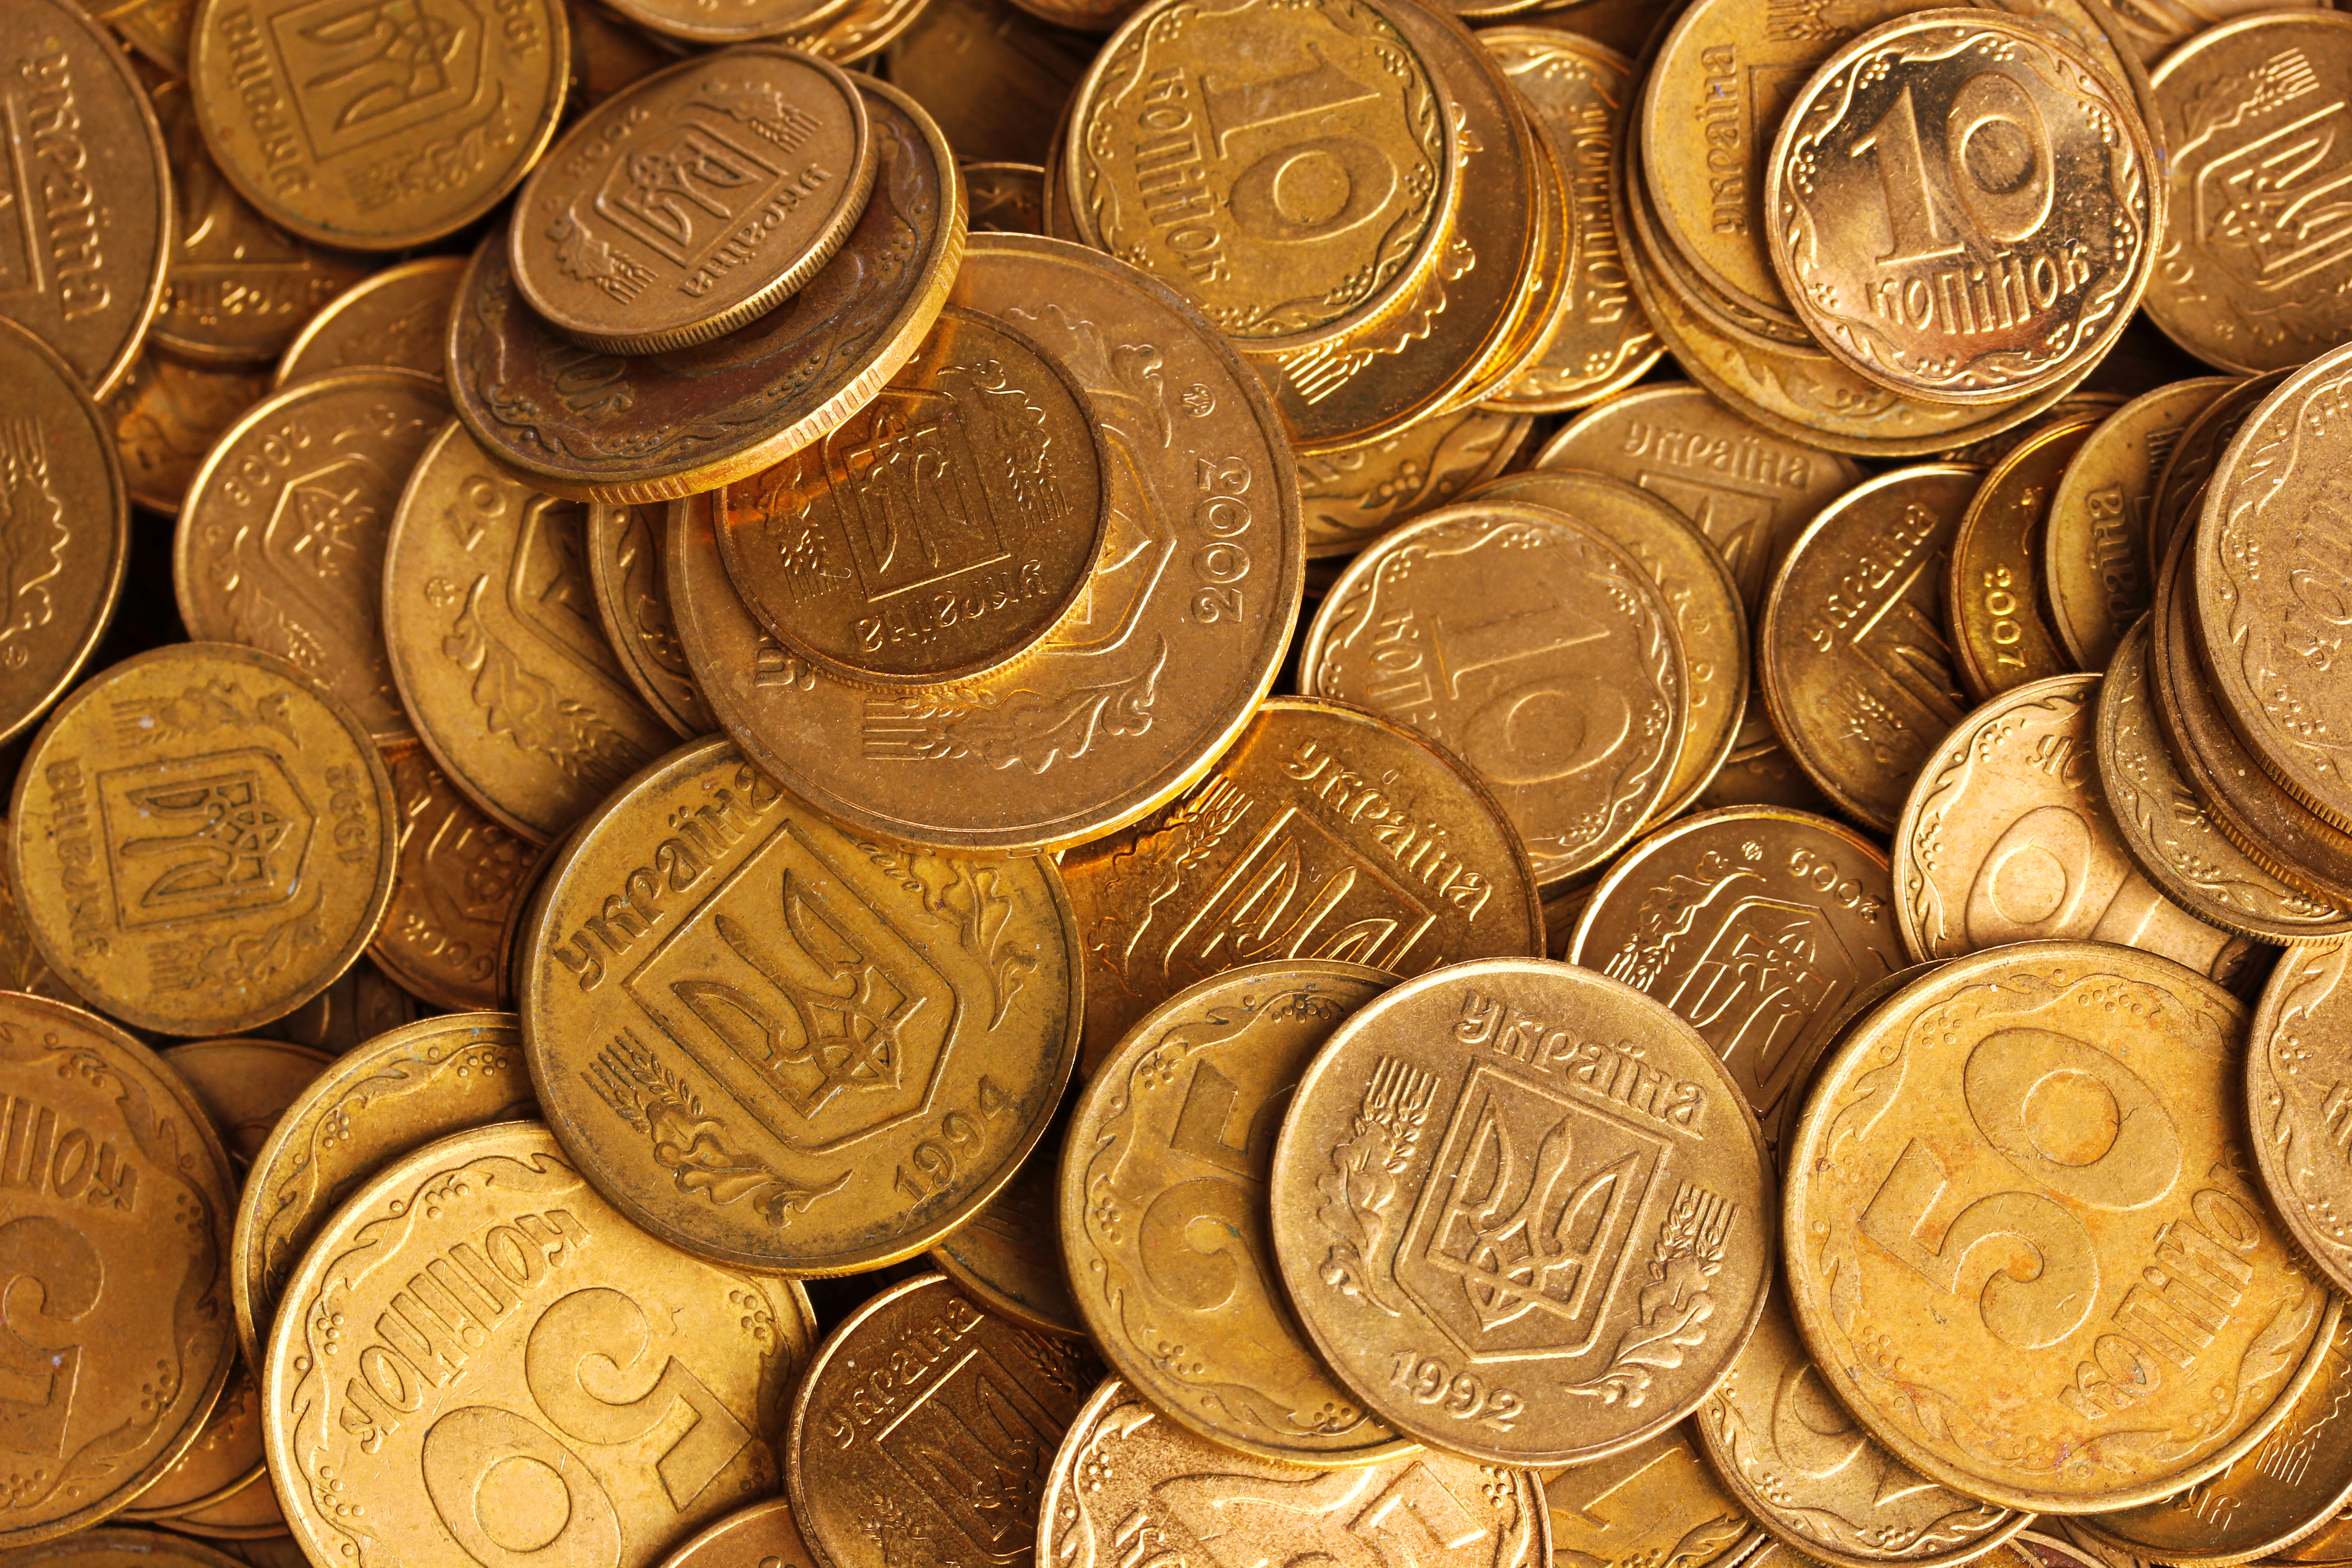 Sell Antique Coins with NYC Bullion